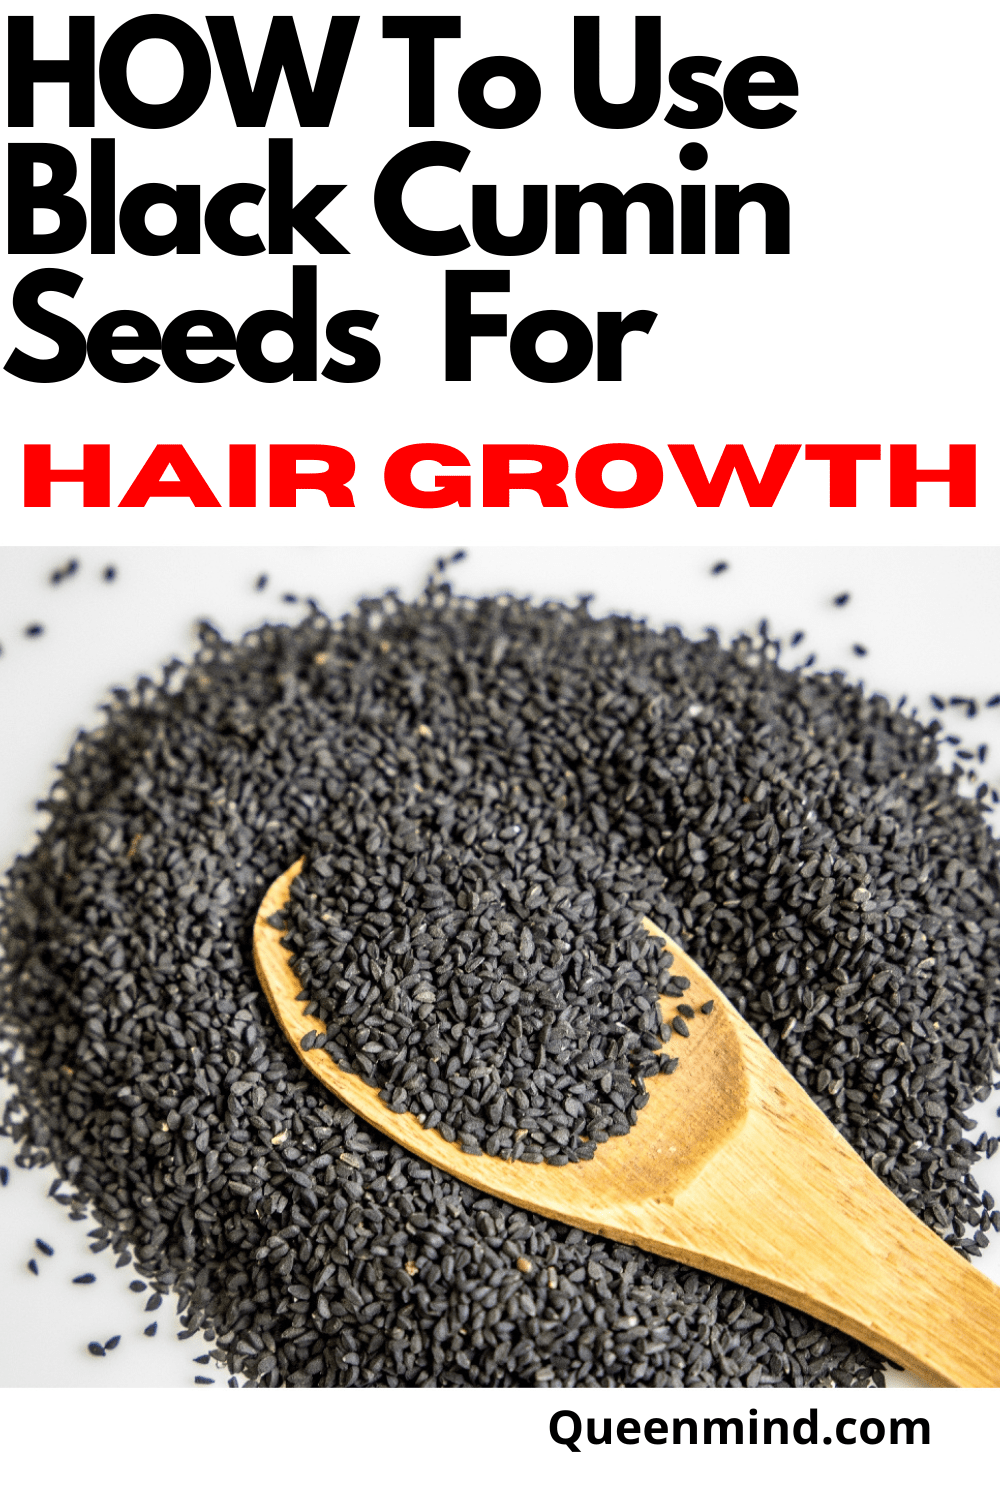 5 Best Ways To Use Black Cumin Seeds (Kalonji) For Hair Growth And Baldness